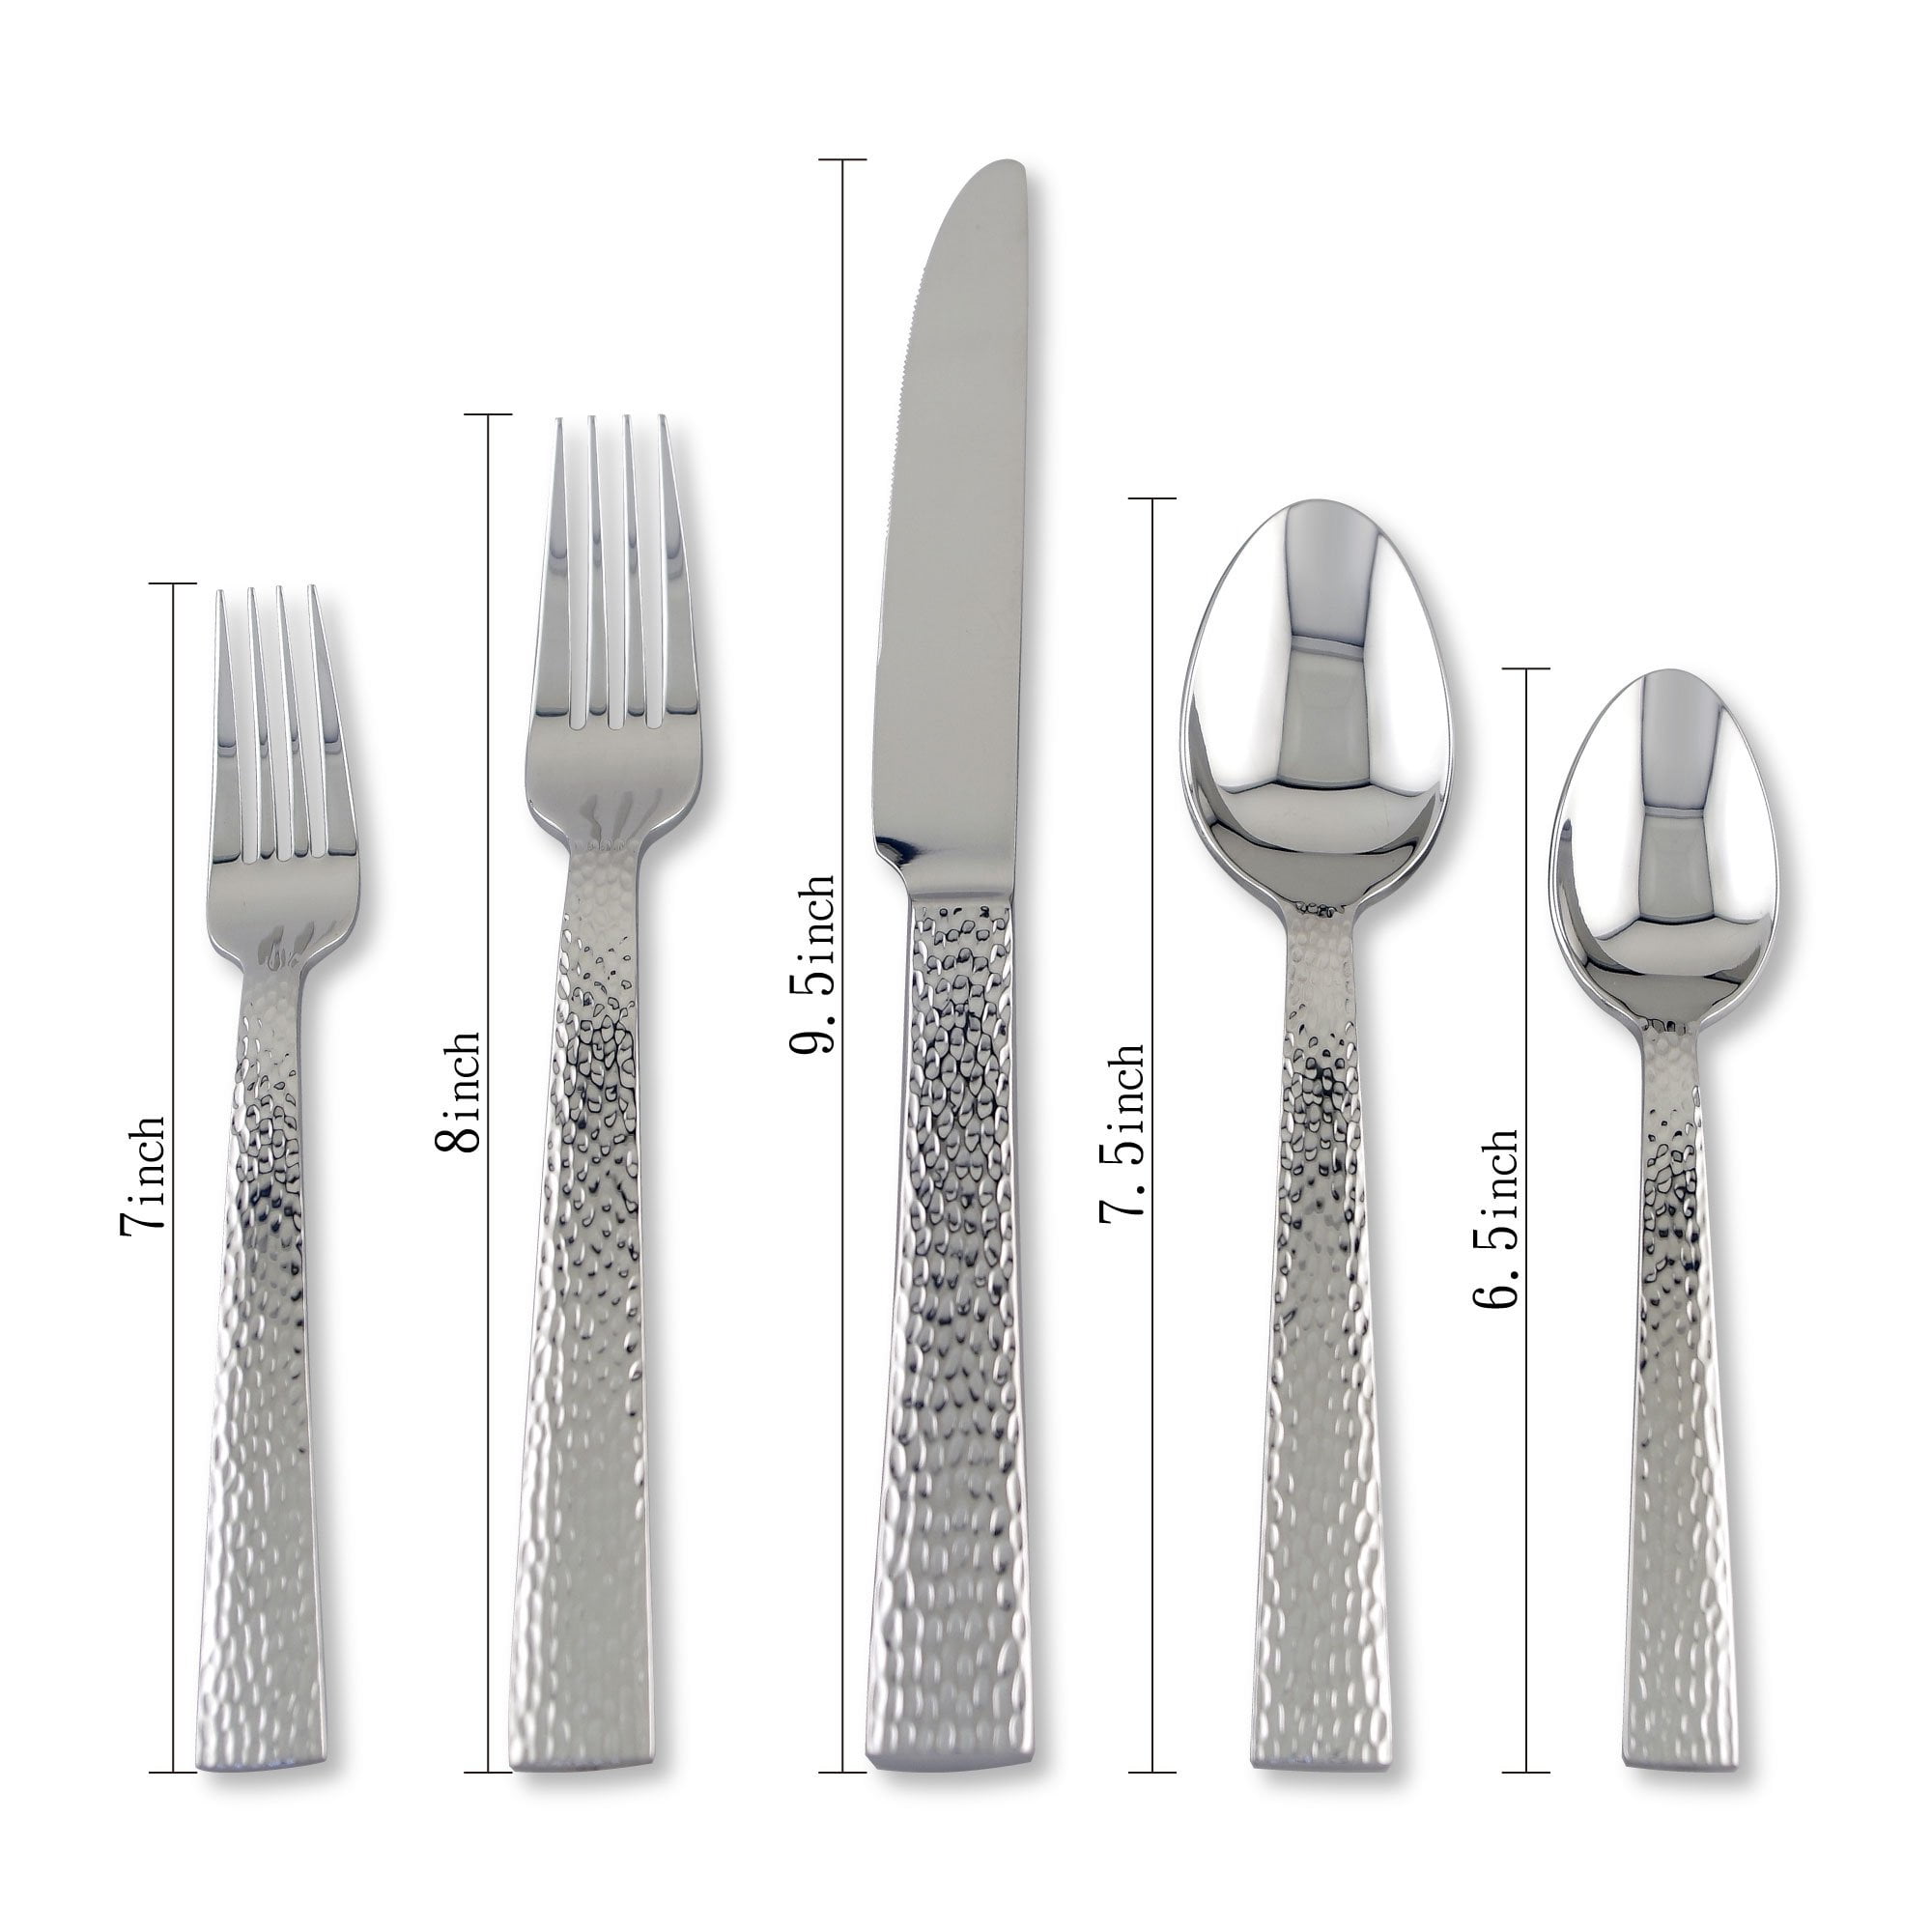 Fiwarex 20 Piece Hammered Silverware Set For 4, 18/10 Stainless Steel  Flatware Set with Textured Handle, Sturdy and Heavy Cutlery Set,  Mirror-Polished